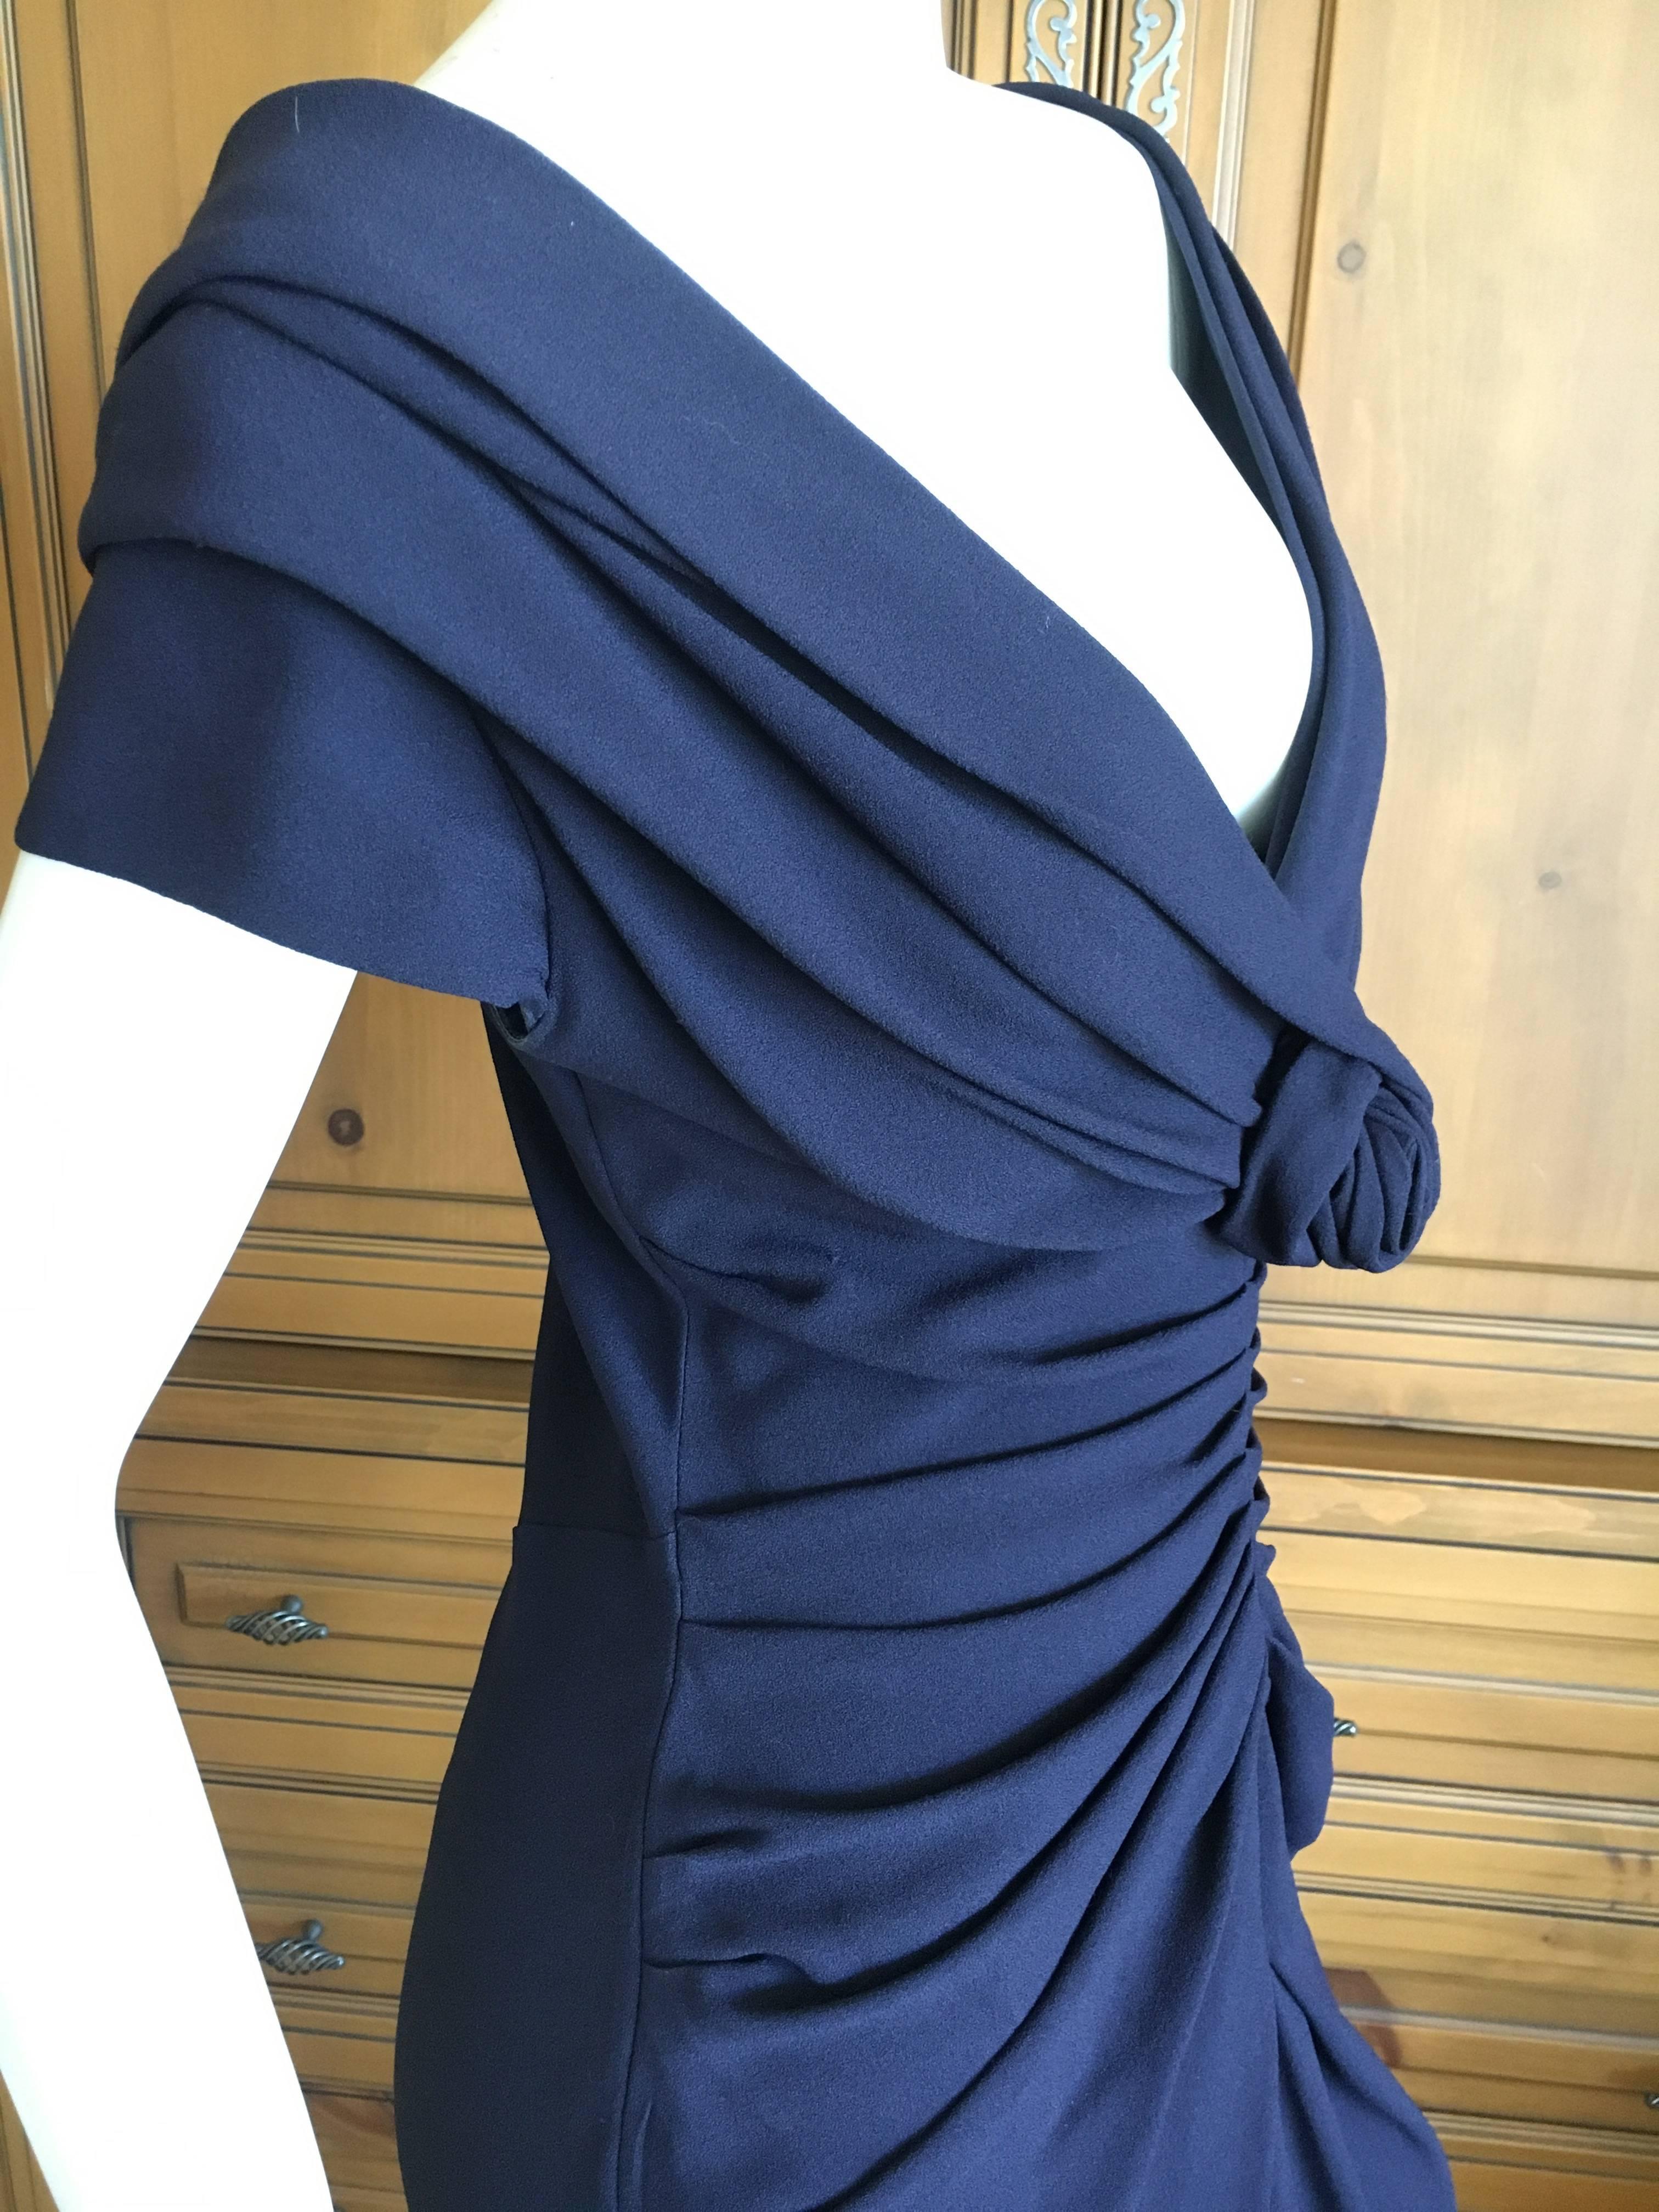 Christian Dior by John Galliano Low Cut Navy Blue Cocktail Dress For Sale 2